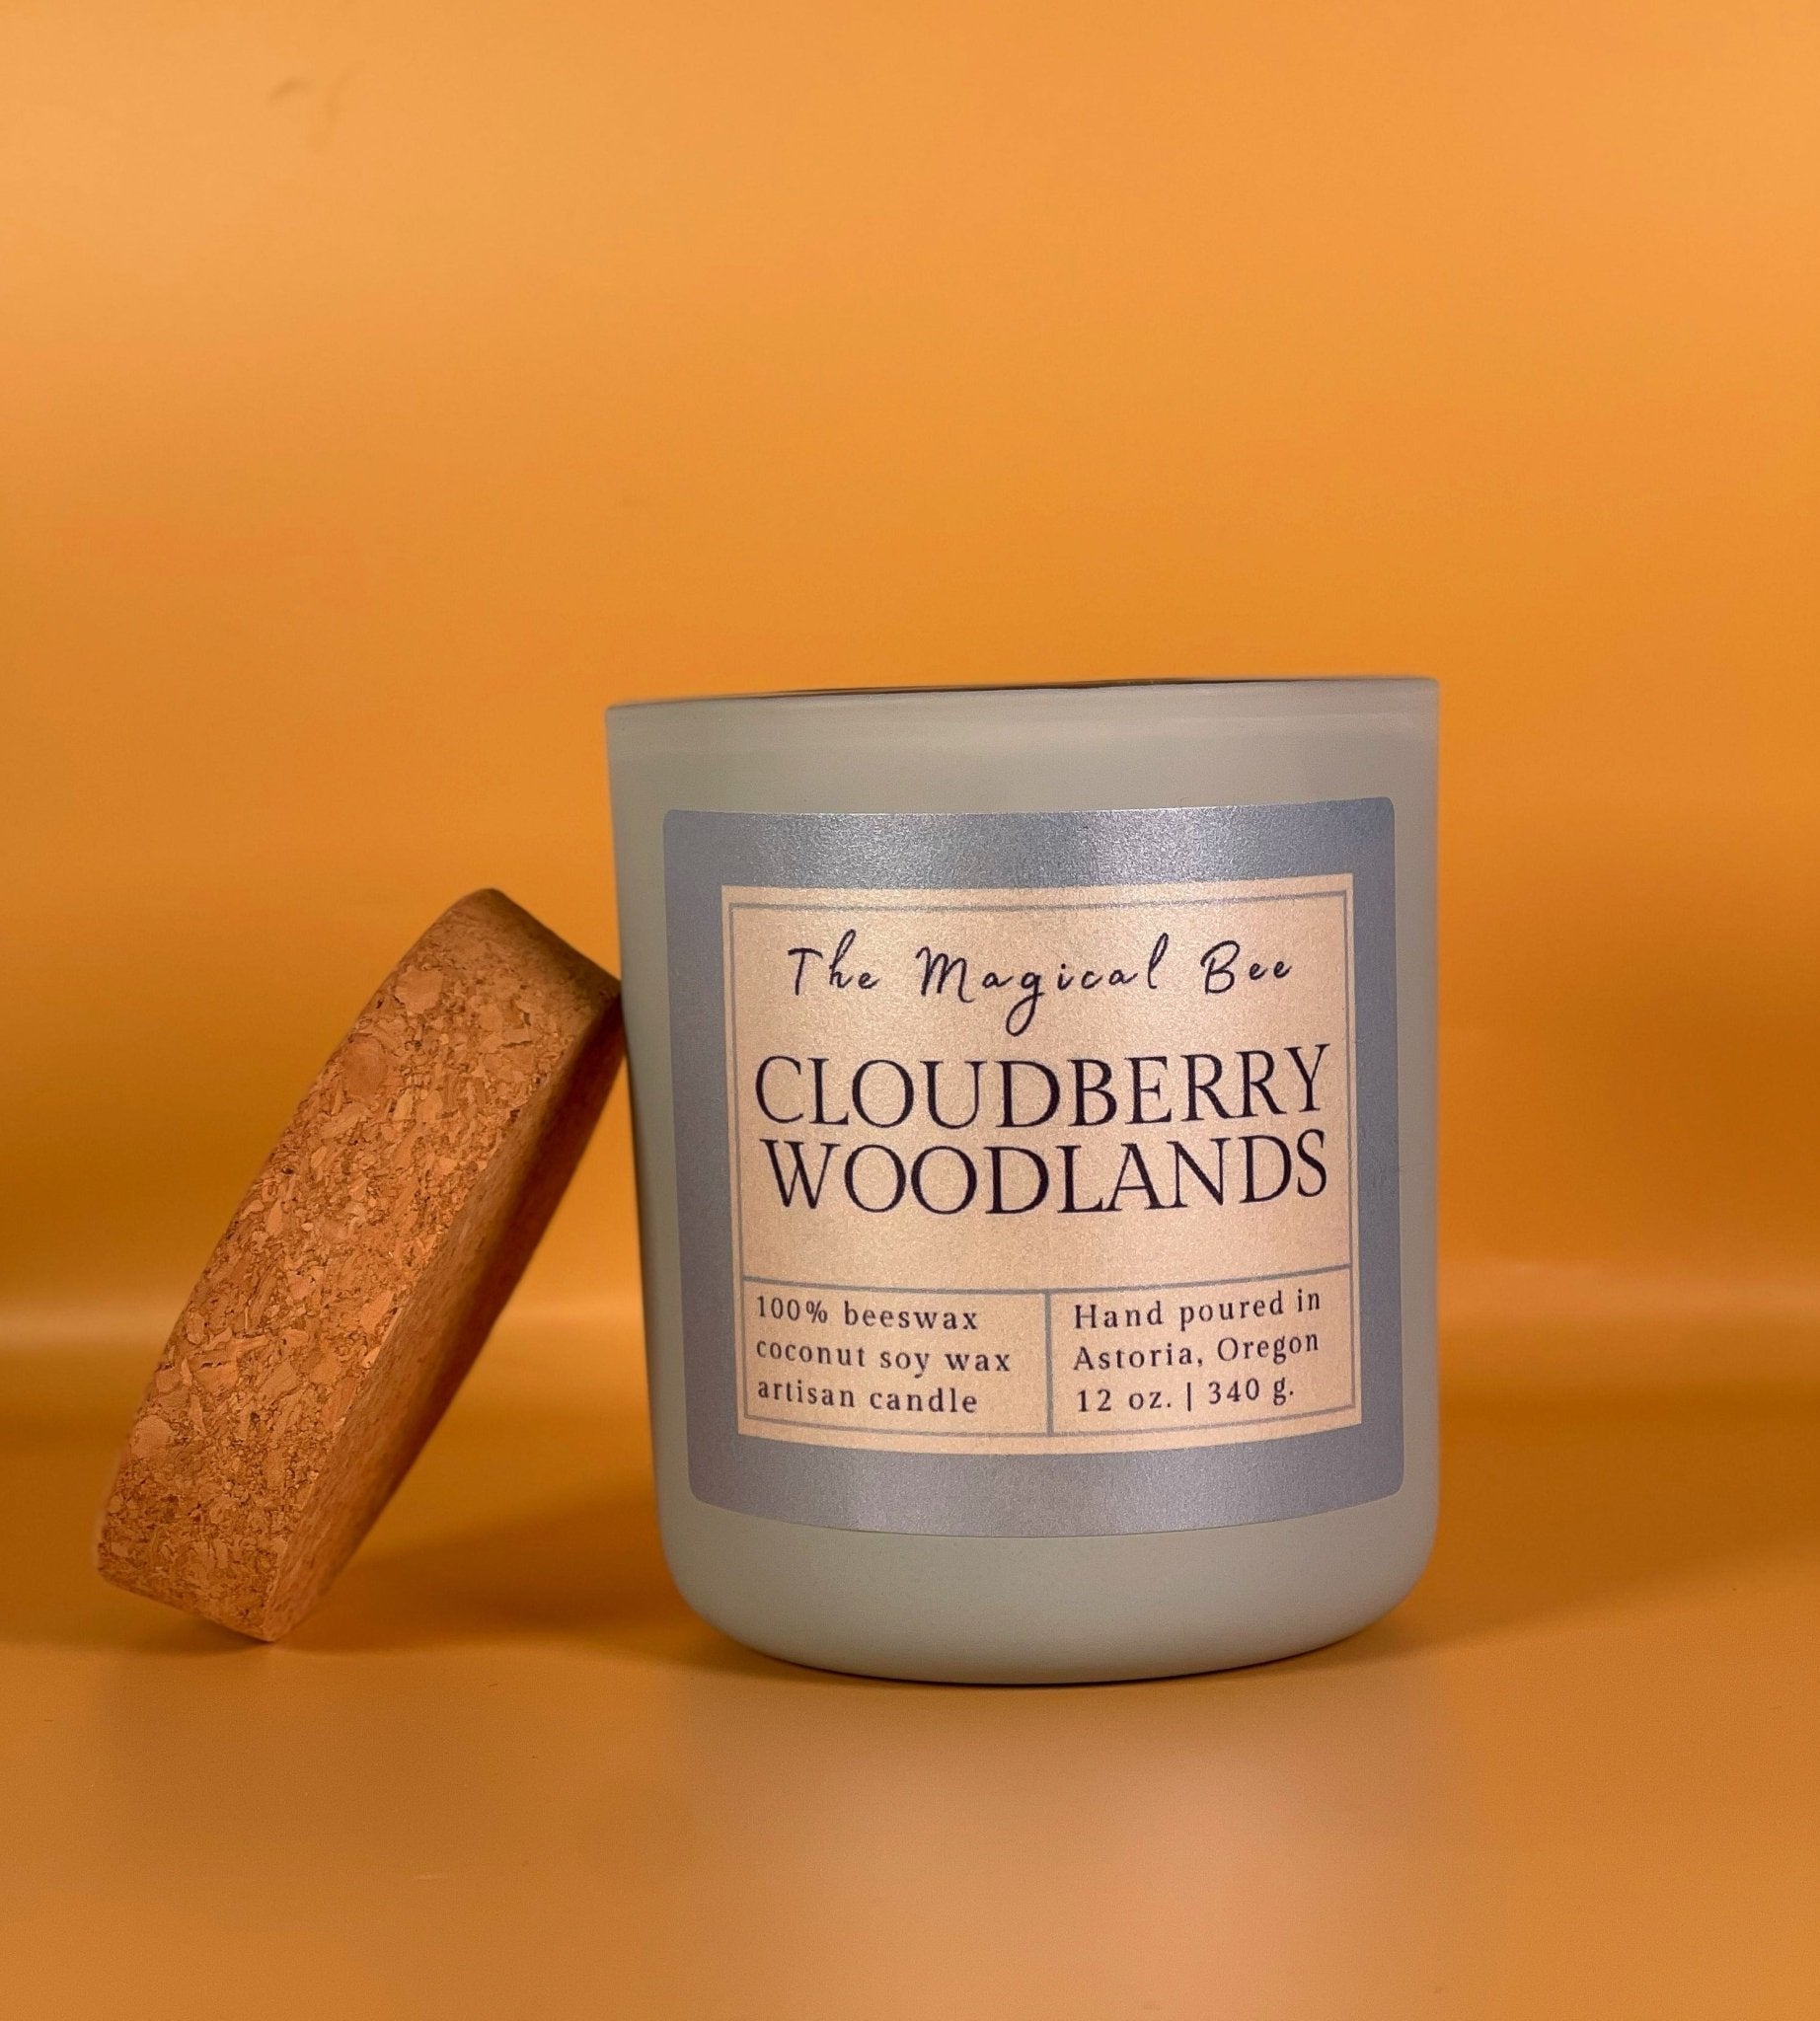 Cloudberry Woodlands Candle - The Magical Bee